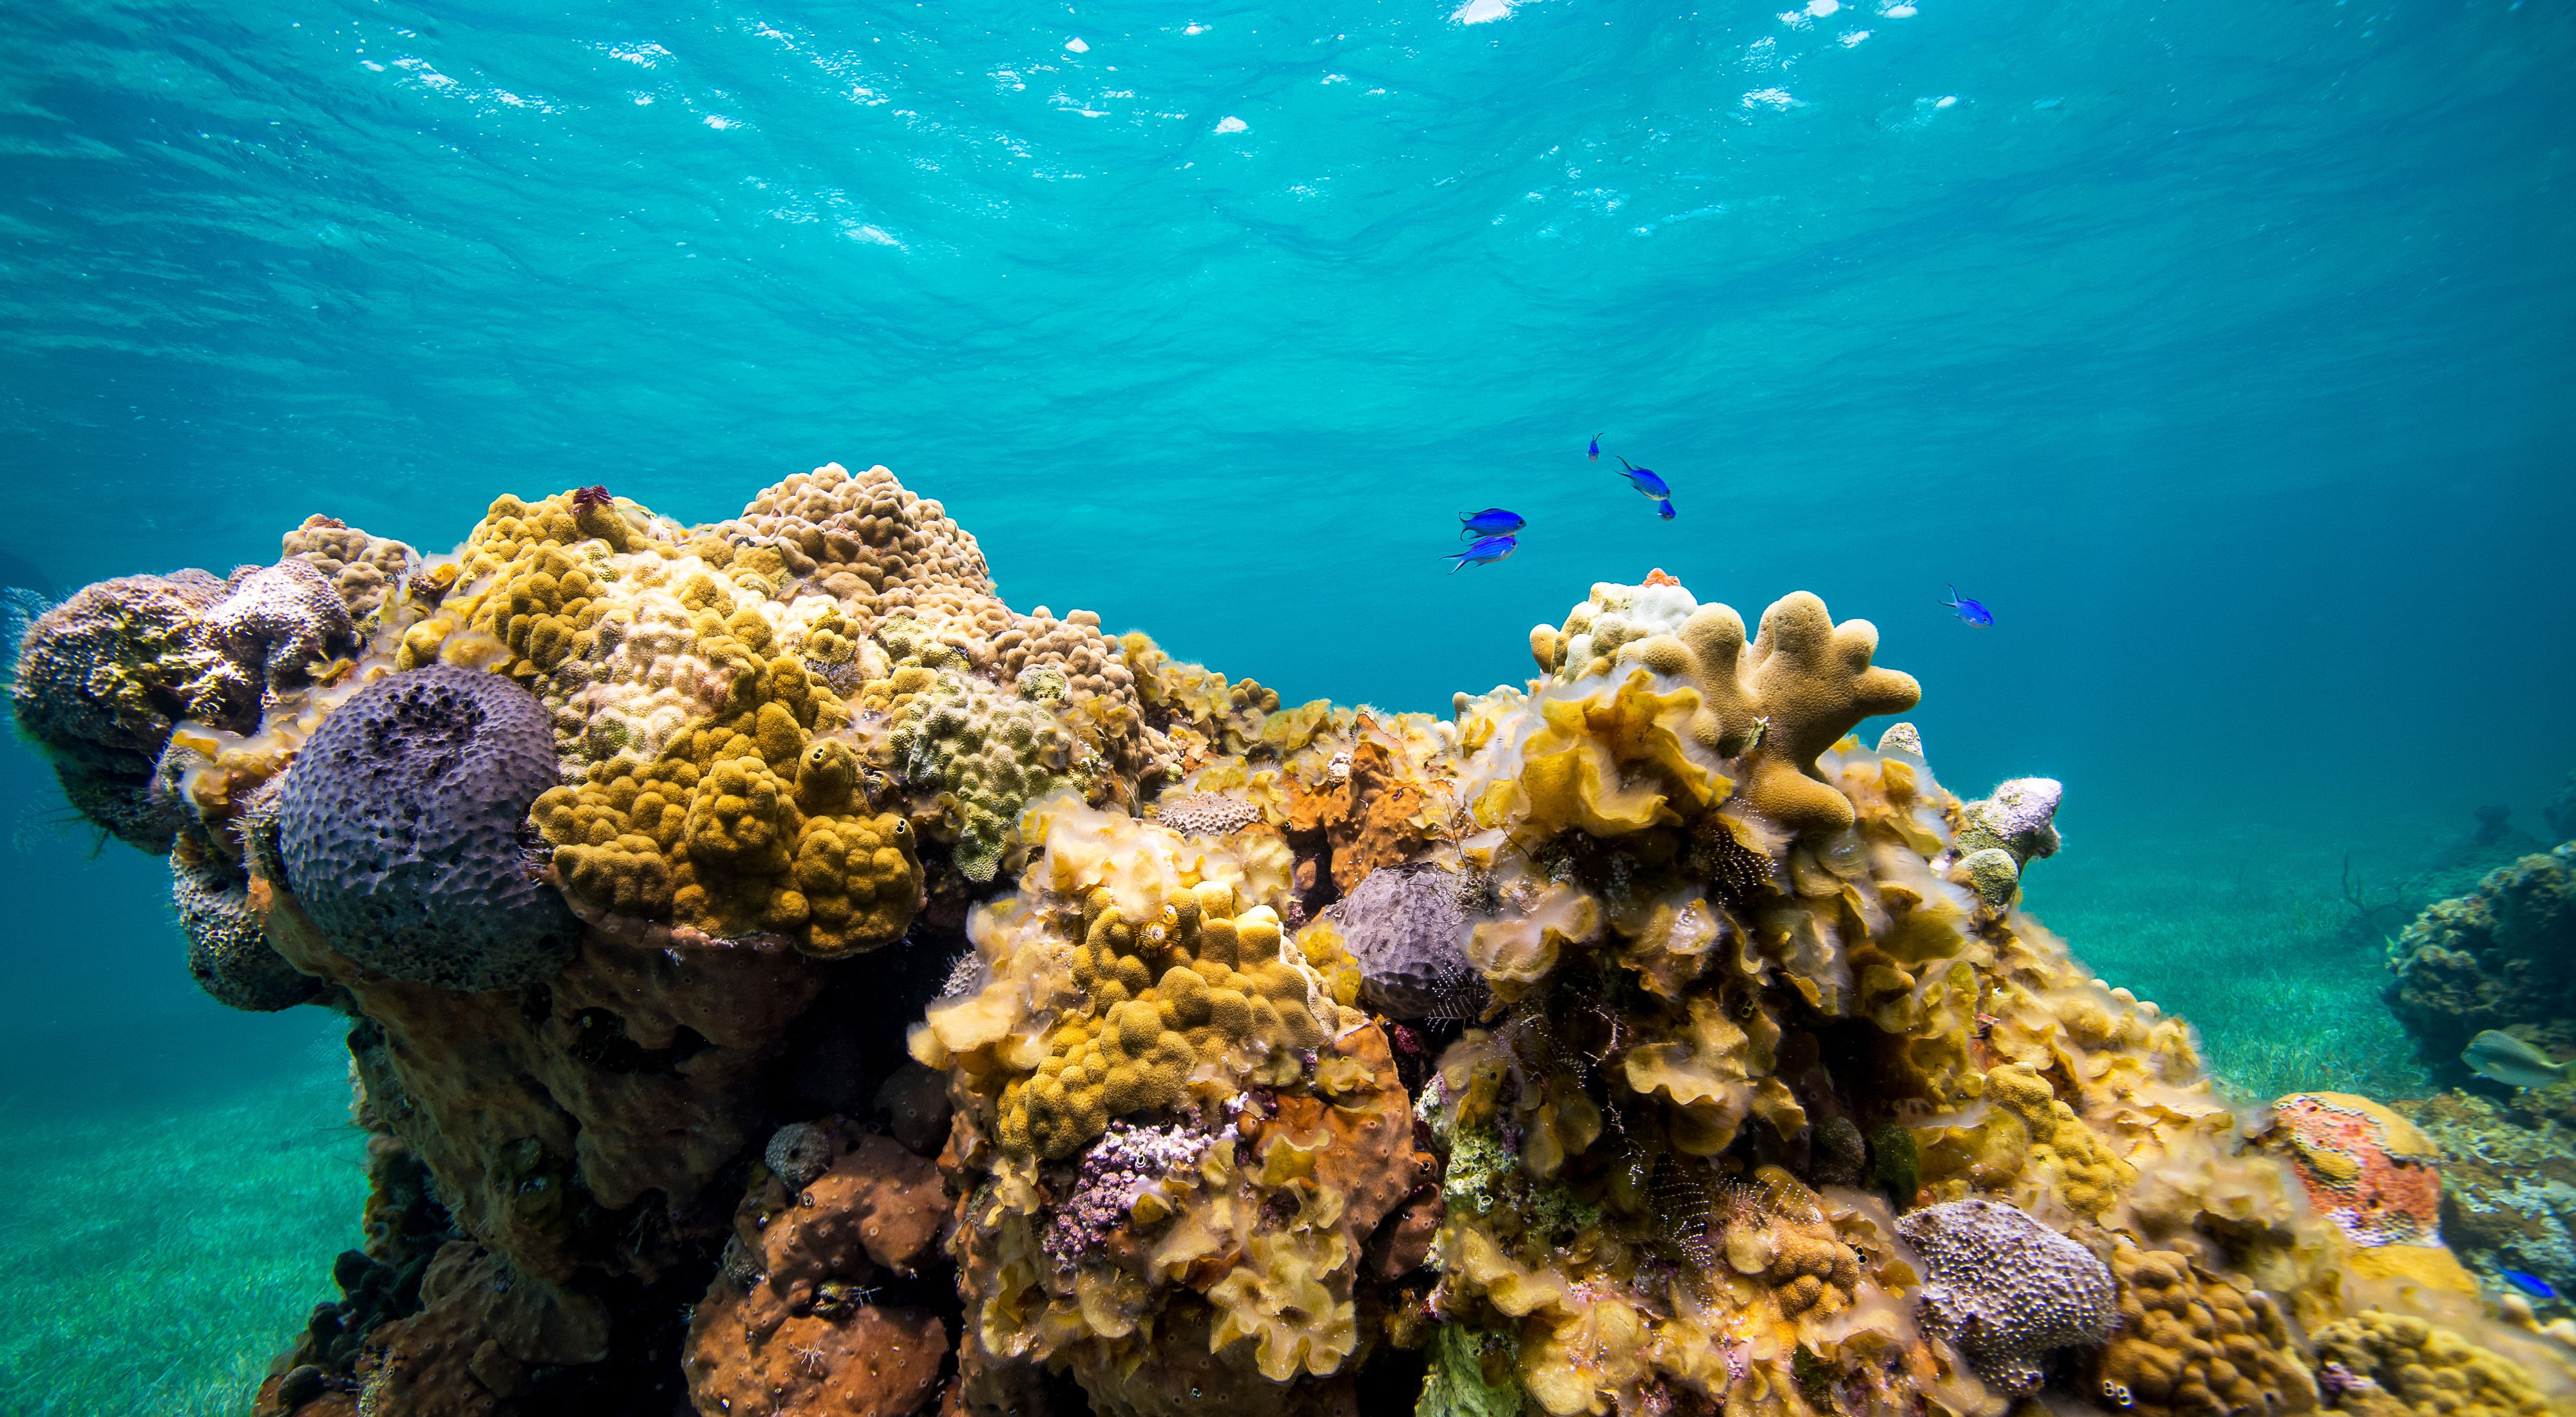 Small blue fish swim over a reef covered in multi-colored corals, surrounded by turquoise ocean waters.